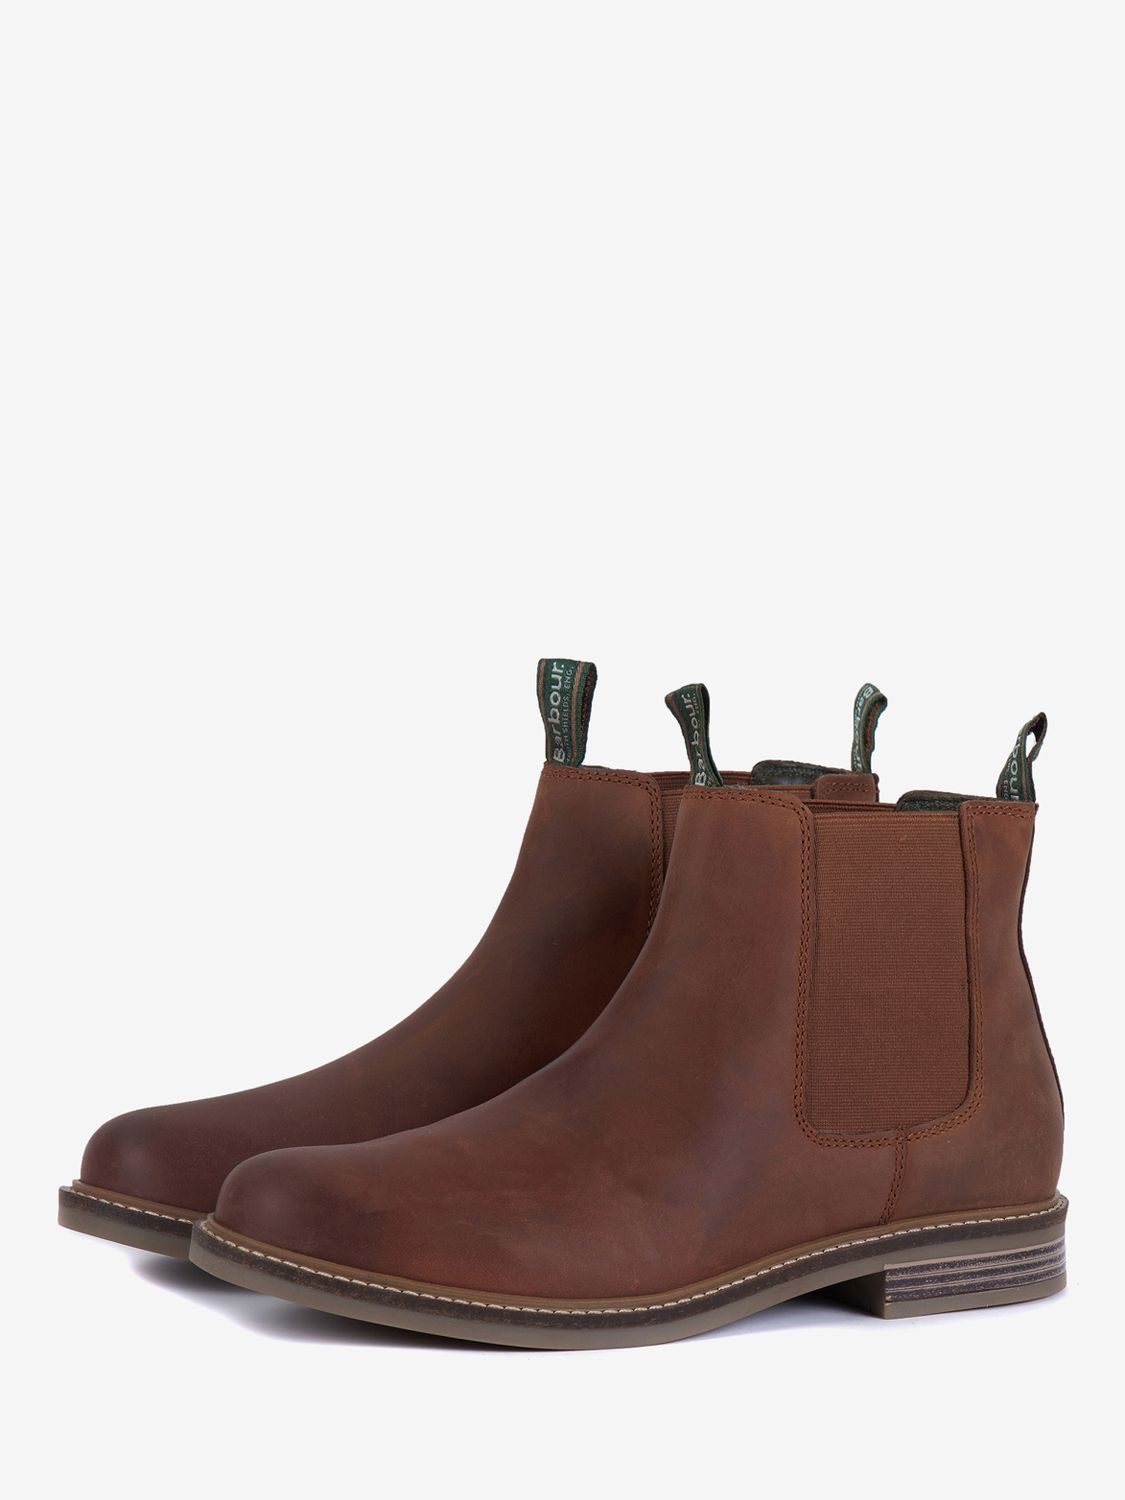 Barbour Farsley Slip On Boots, Brown at John Lewis & Partners